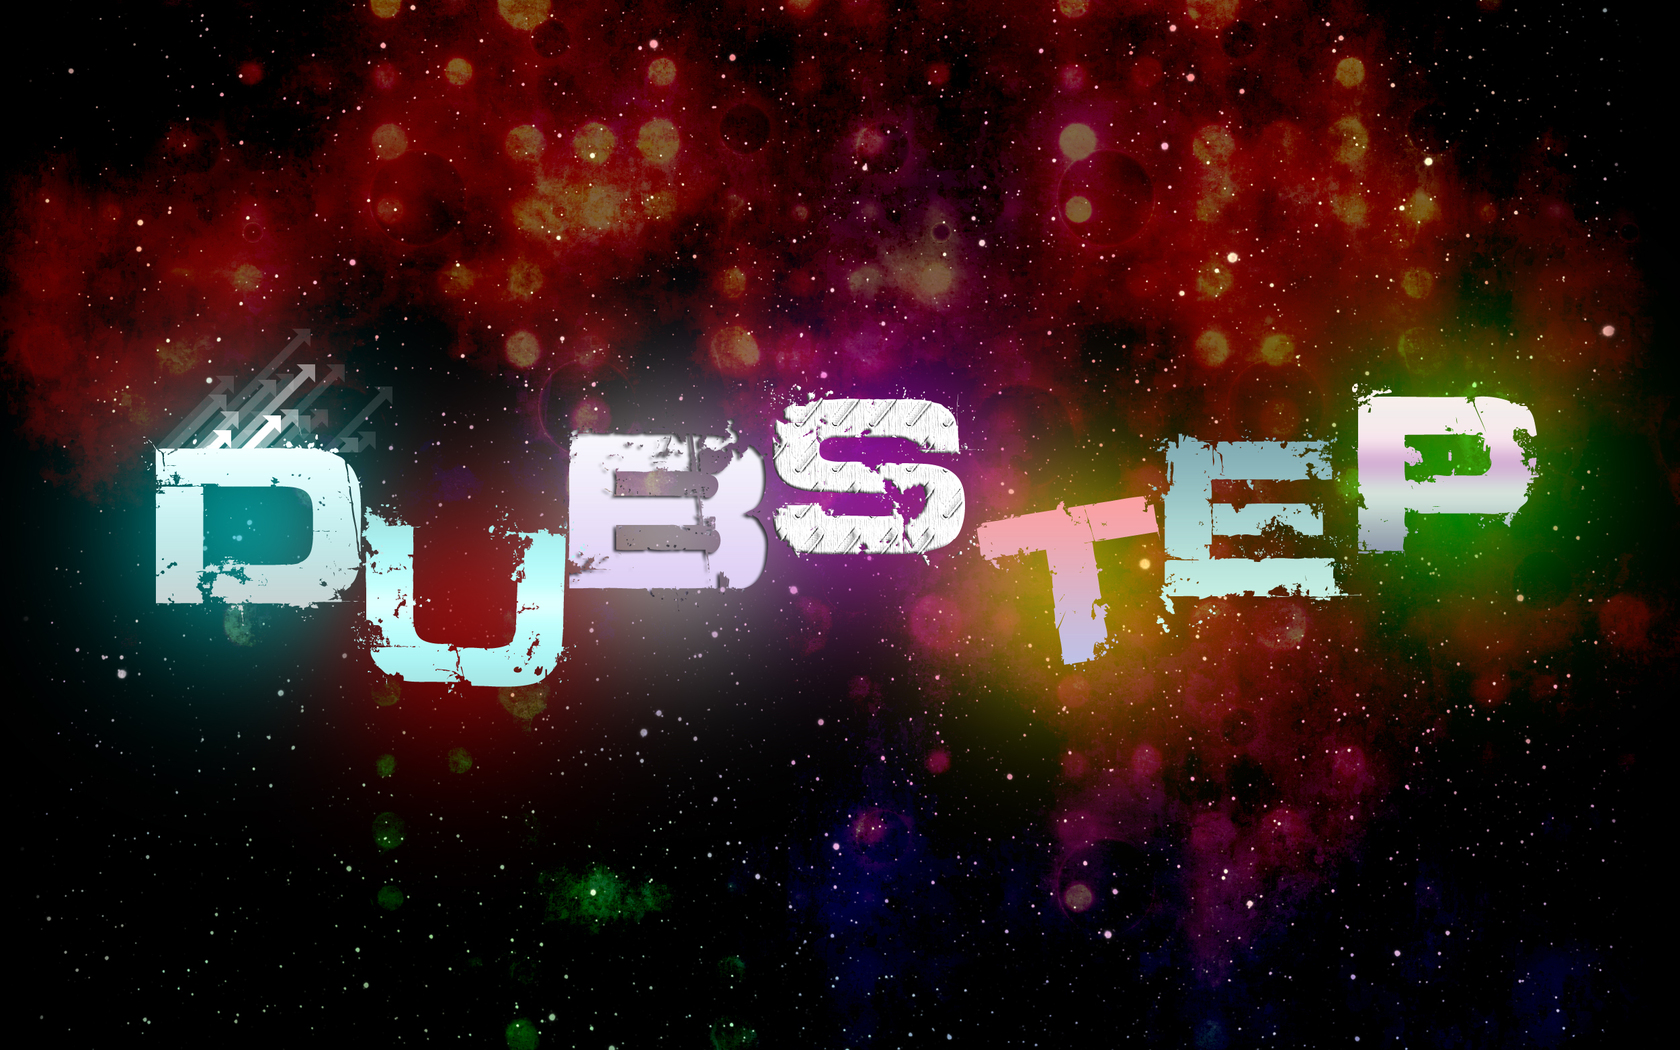 colorful dubstep